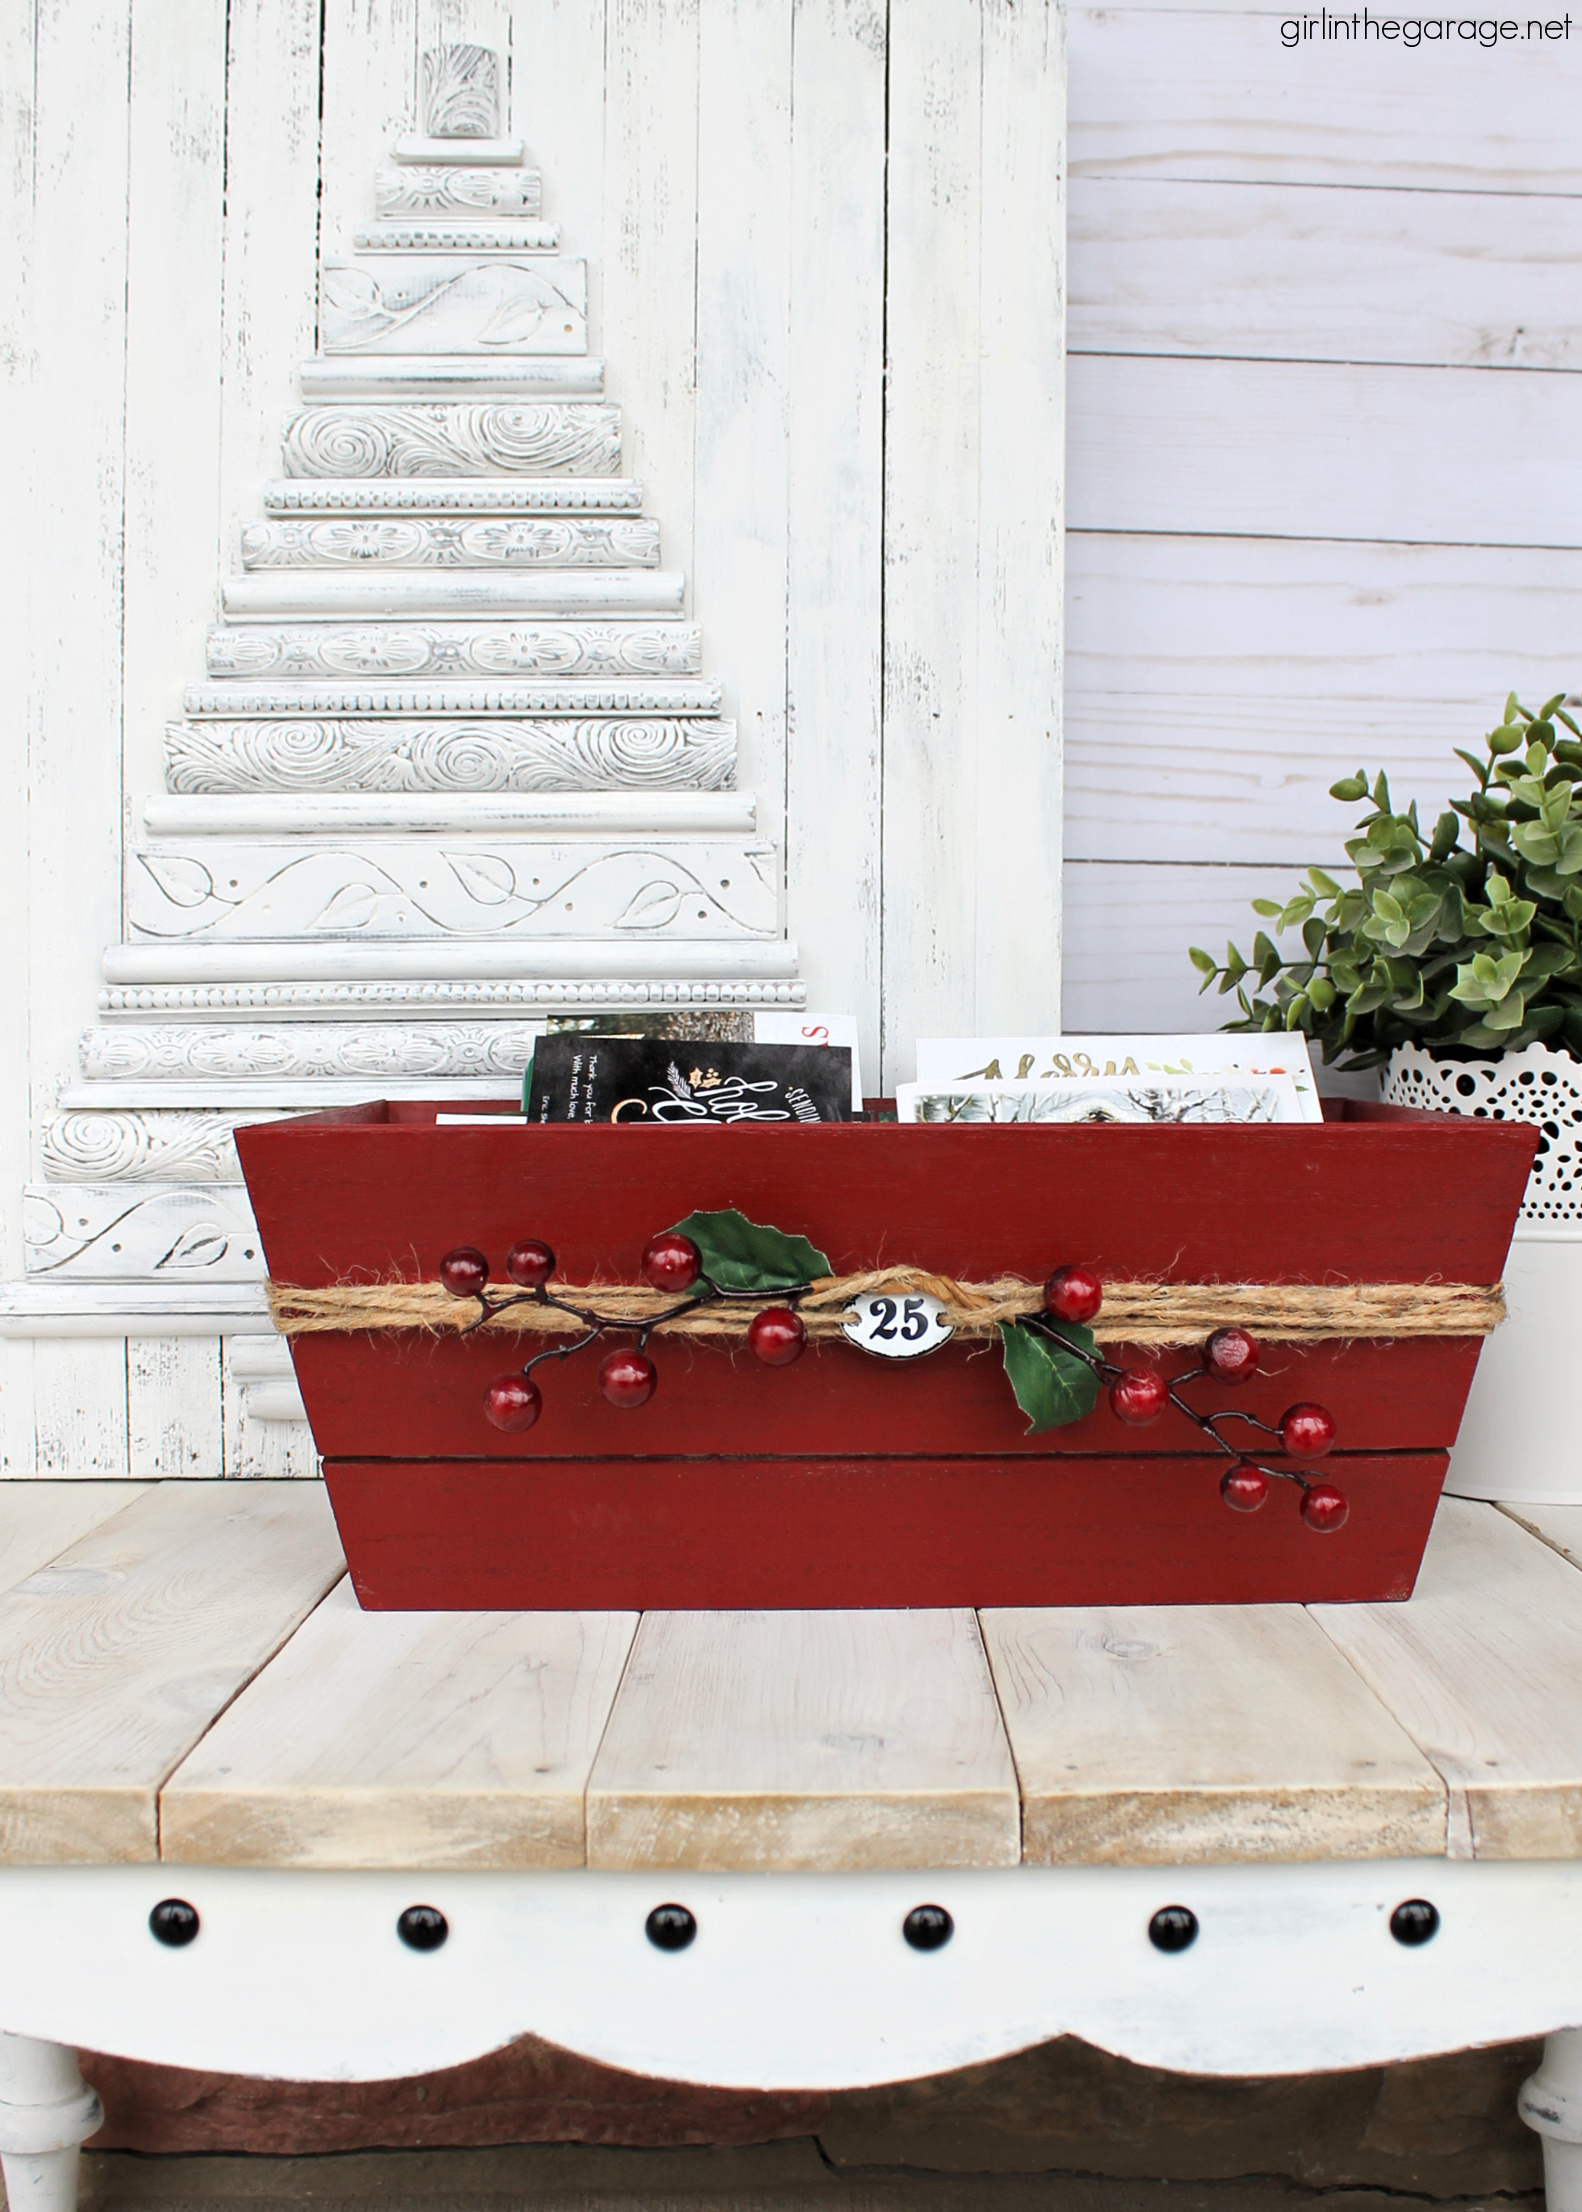 Learn how to transform a plain Target wood crate into a festive DIY Christmas card holder box with just a few supplies. Super cute Christmas decor idea by Girl in the Garage